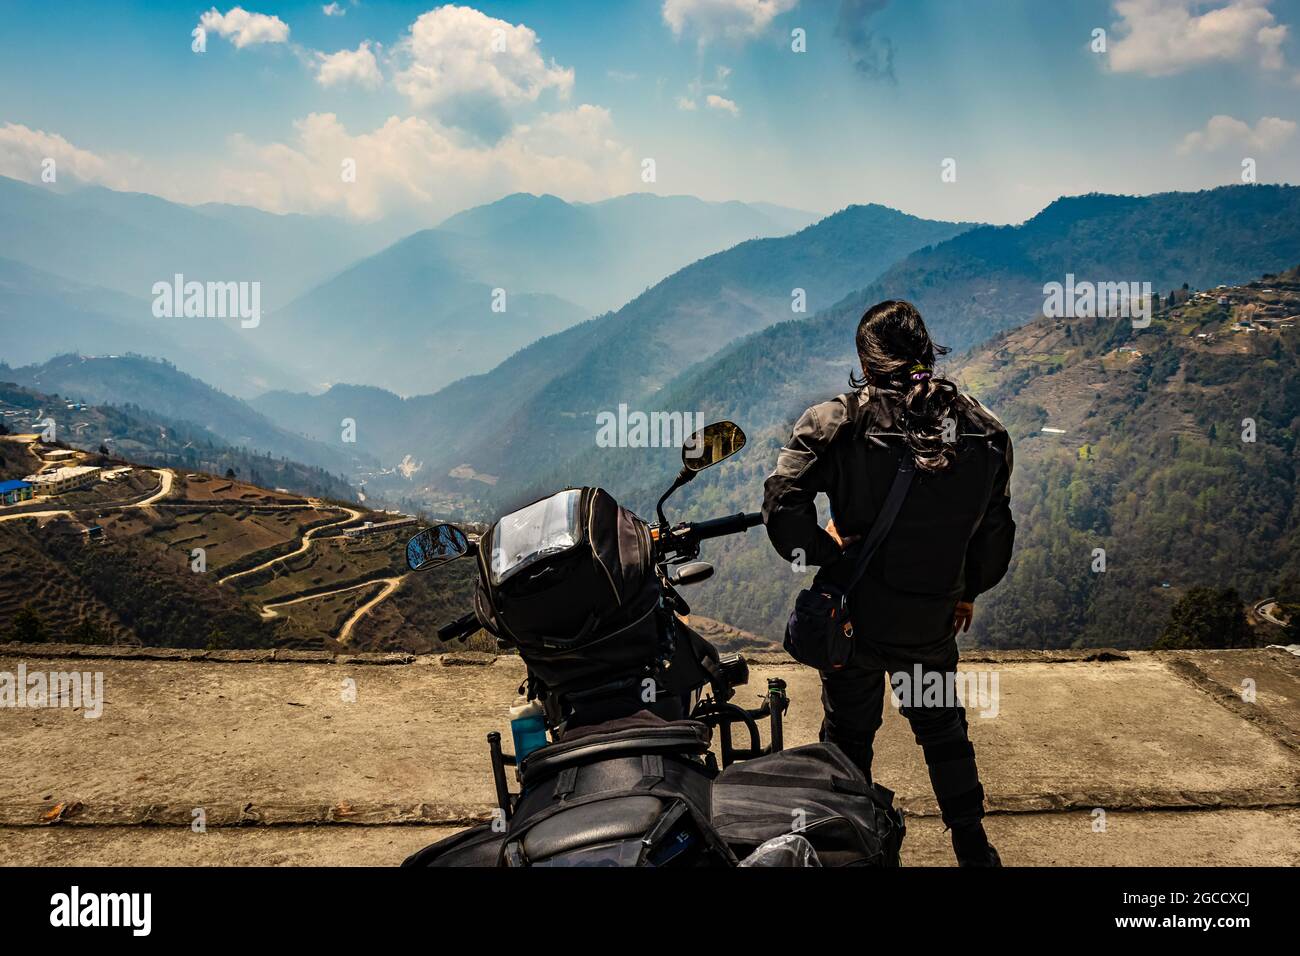 girl motorcyclist with her loaded motorcycle and pristine natural view at morning image is taken at bomdila arunachal pradesh india. Stock Photo